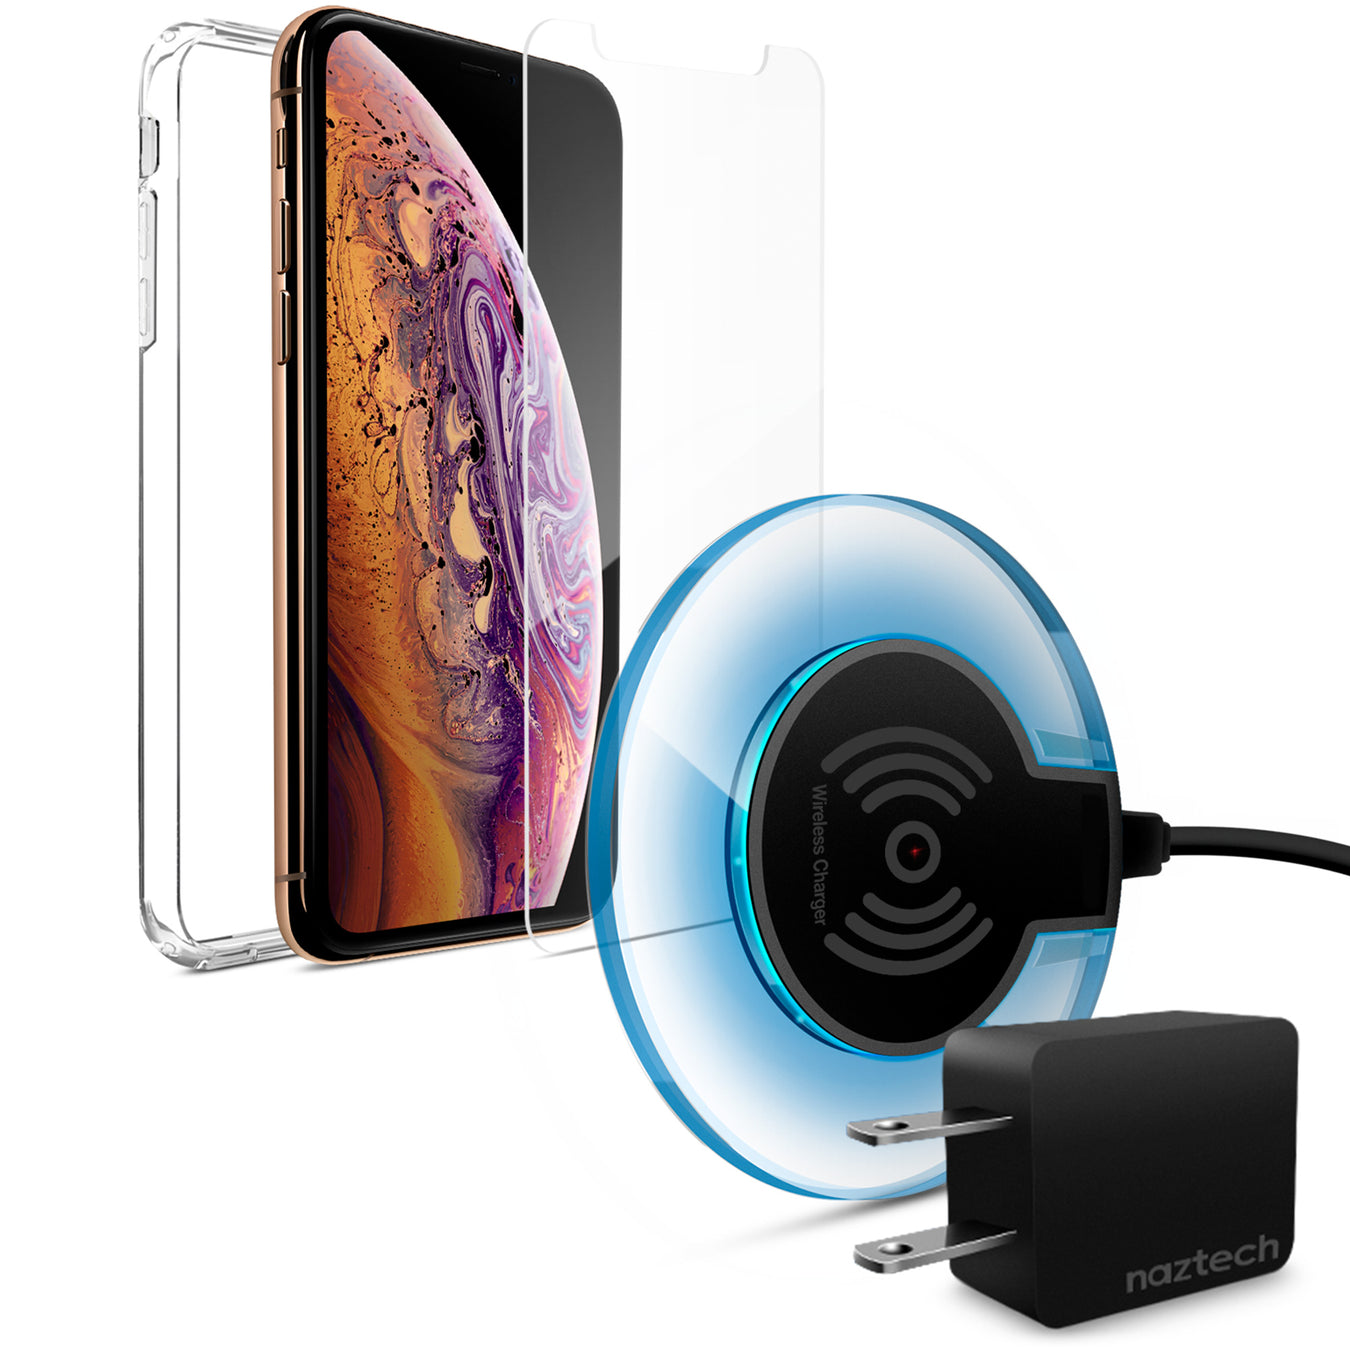 Wireless Bundle Kit for the Iphone X/XS